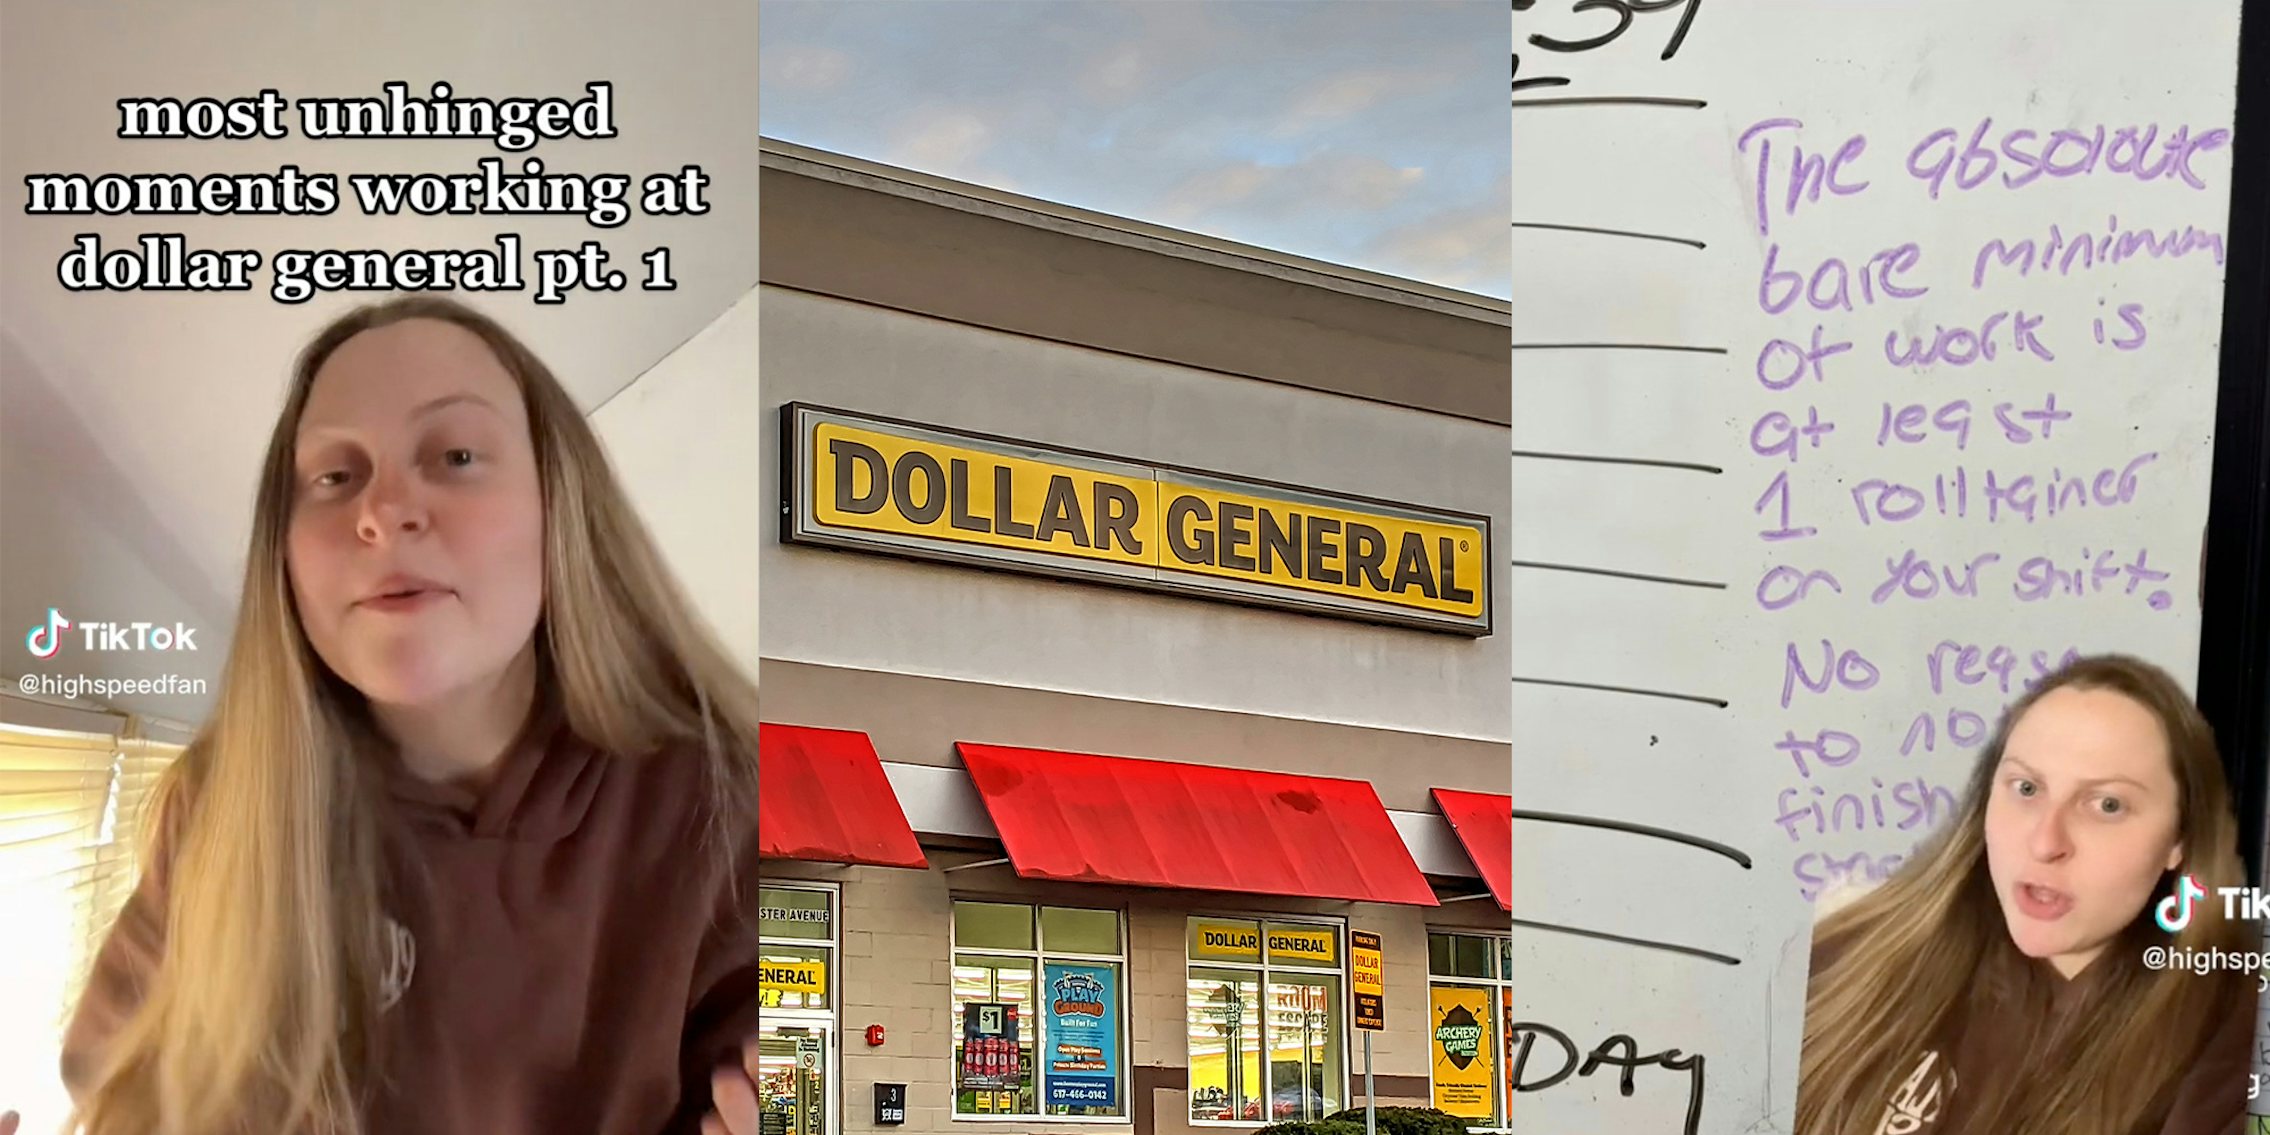 Serial job hopper claims Dollar General she worked at was infested with rats